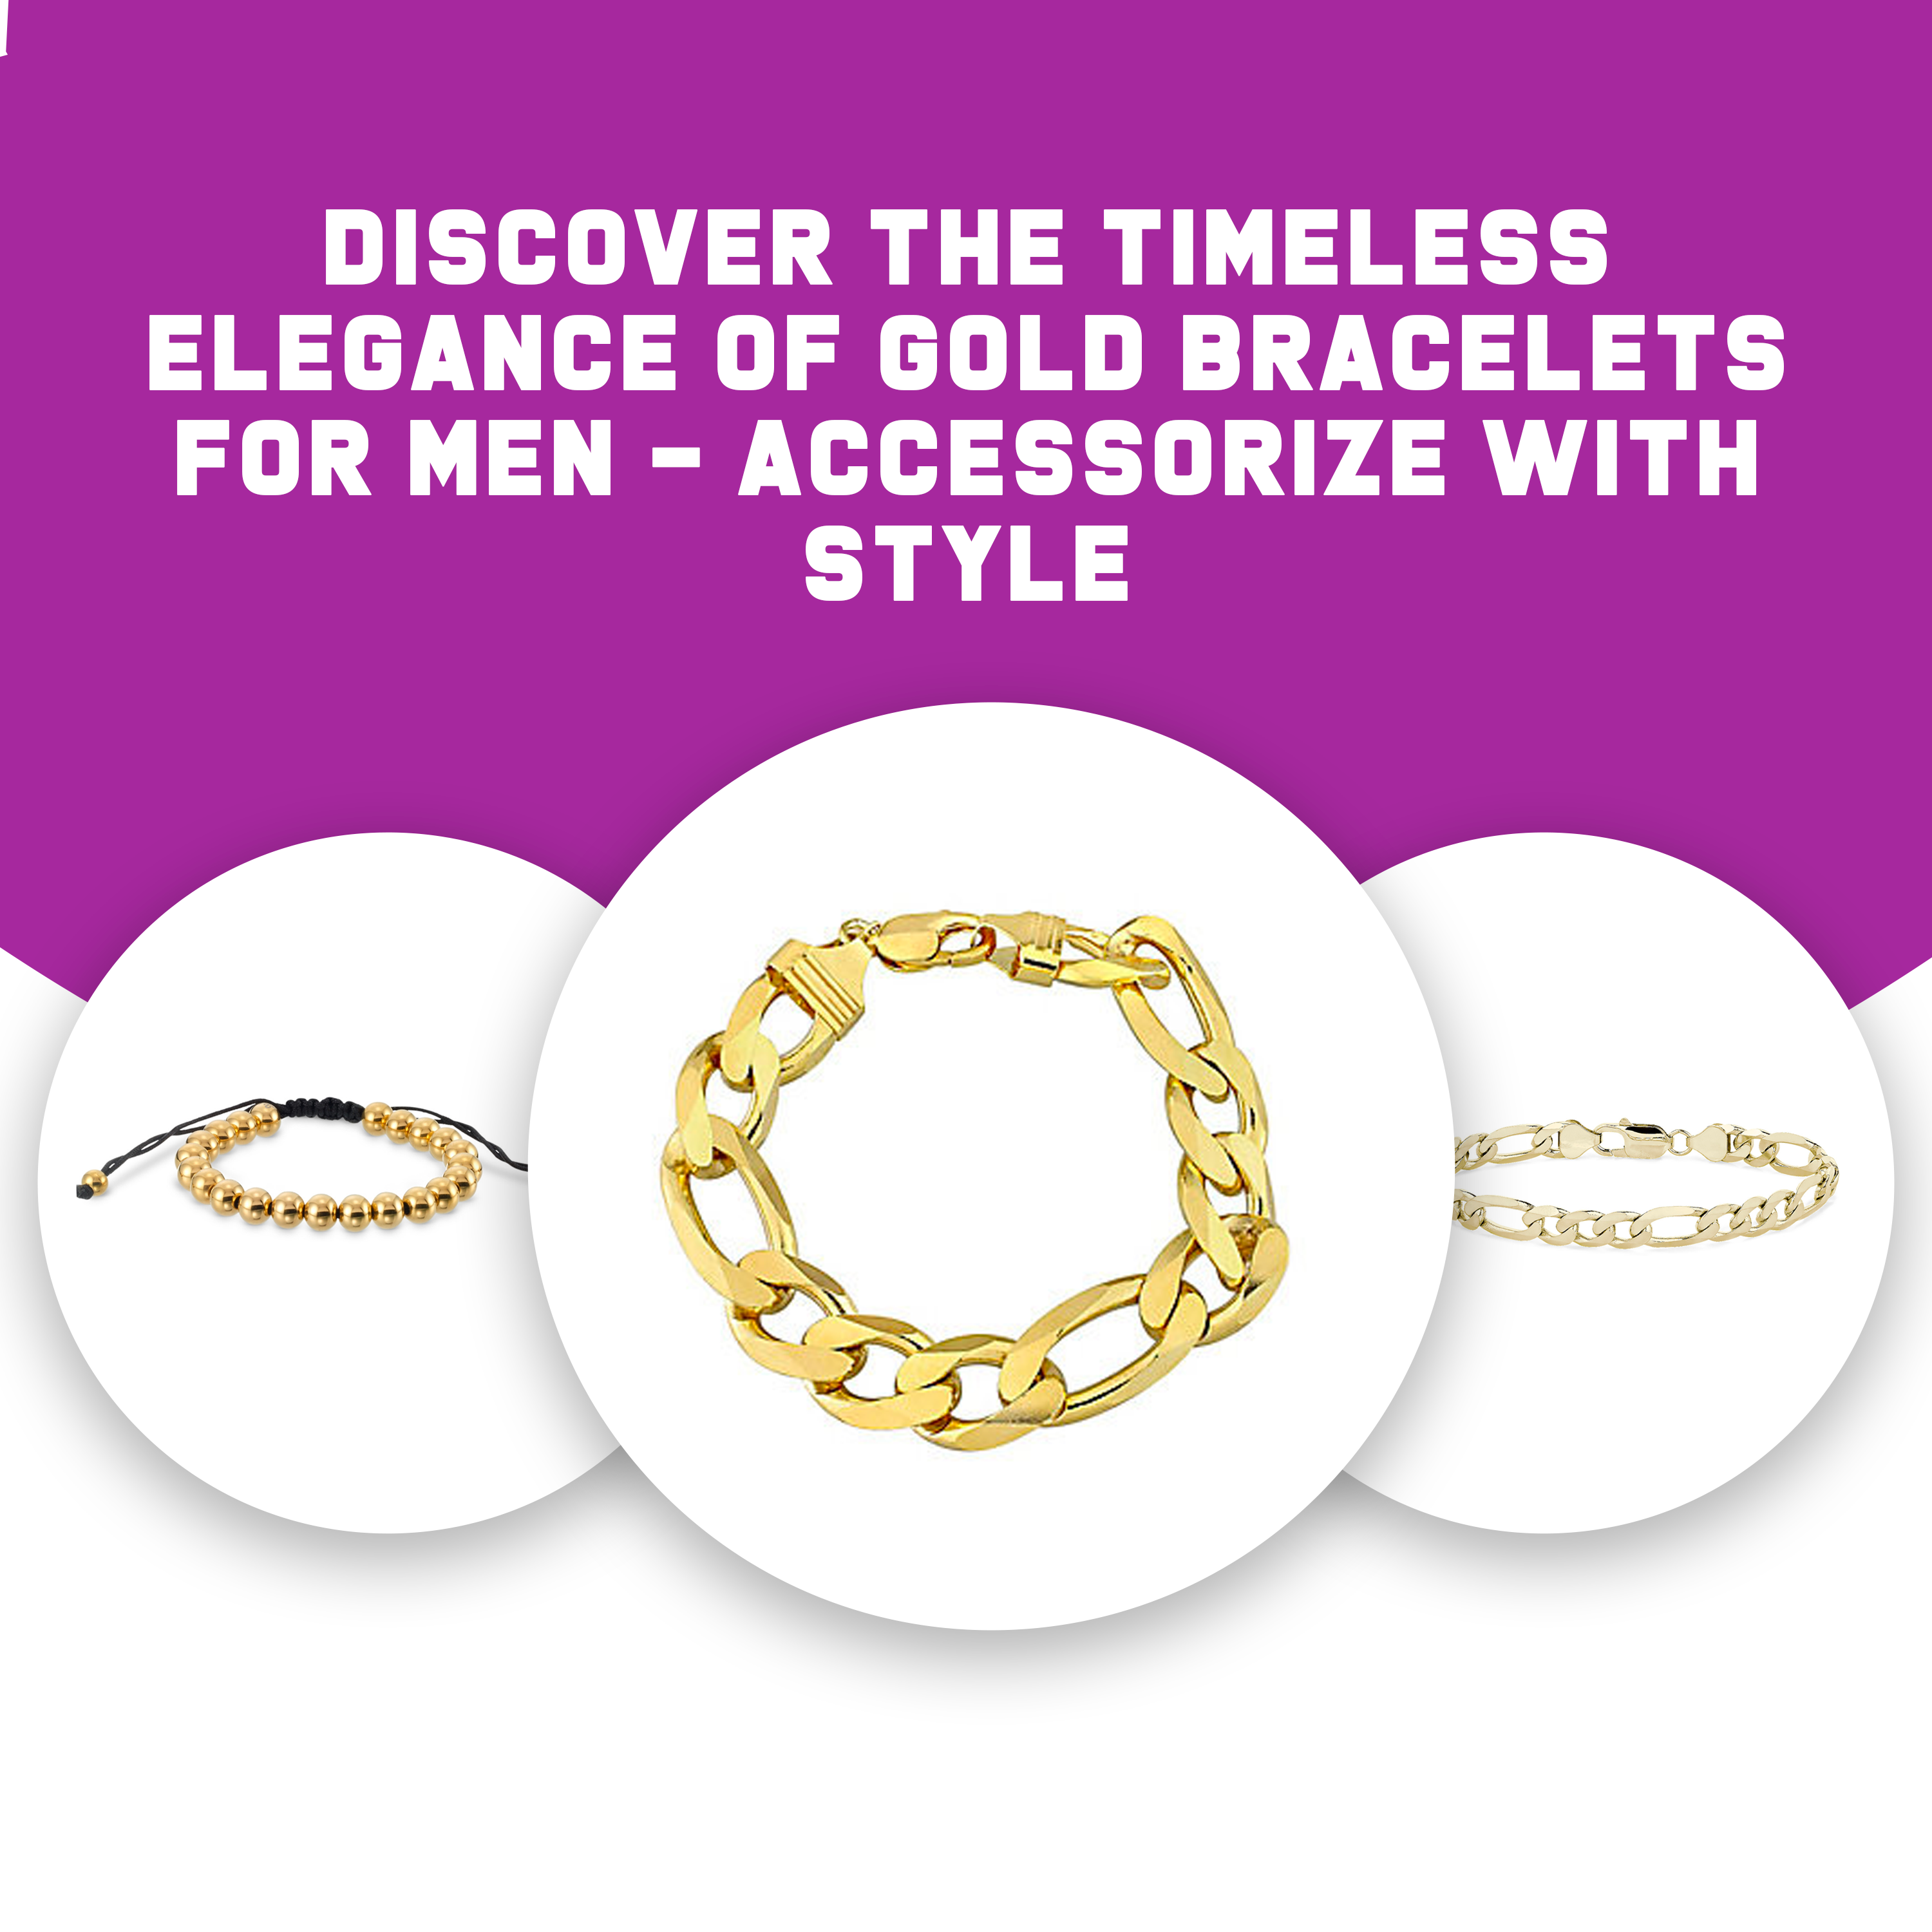 Discover The Timeless Elegance Of Gold Bracelets For Men – Accessorize With Style